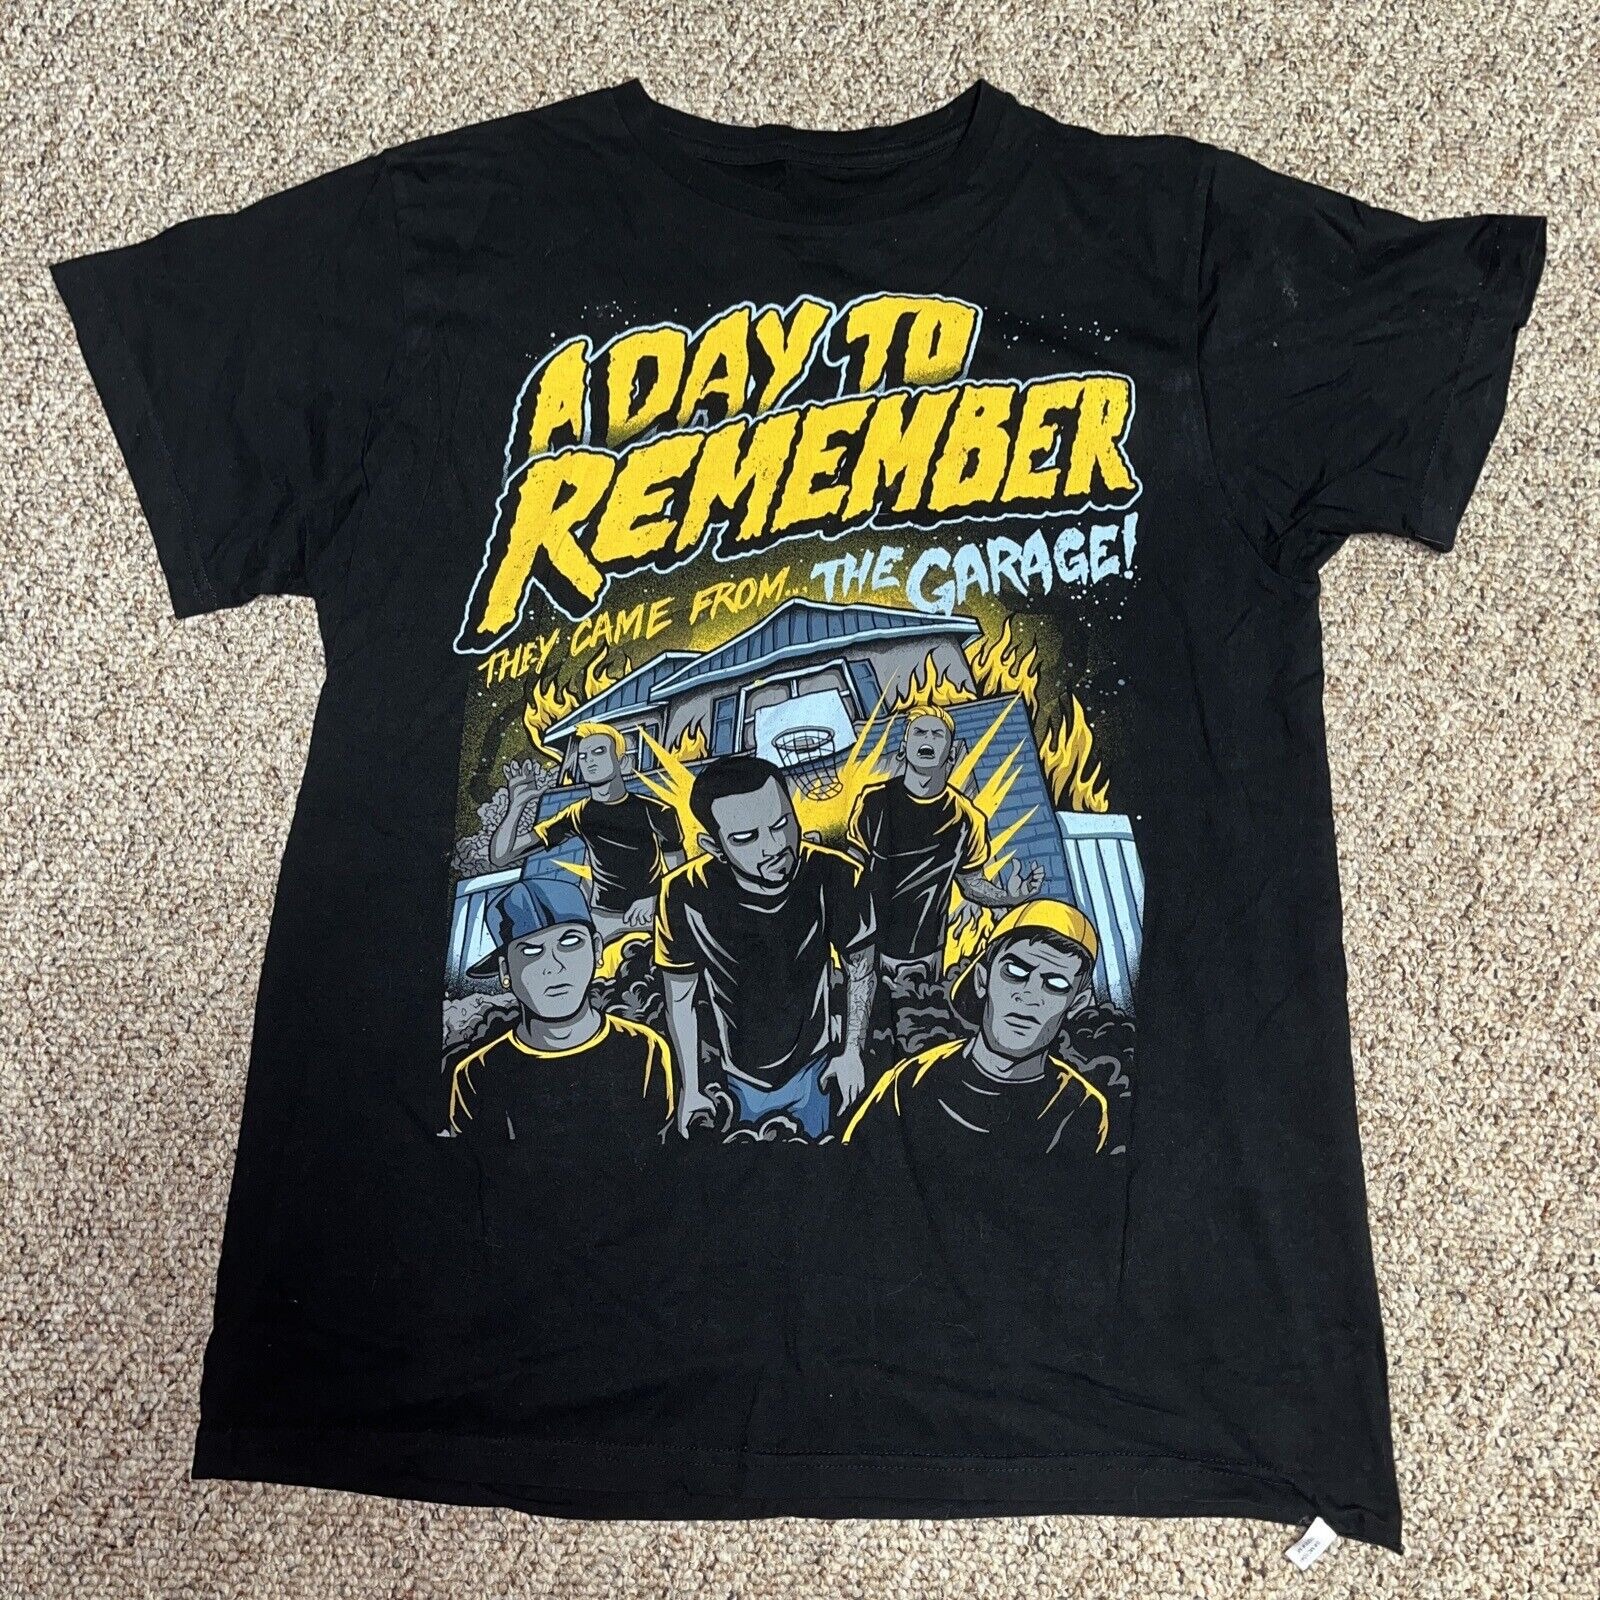 A Day To Remember T Shirt They Came From The Garage Band T Shirt Menâs Medium